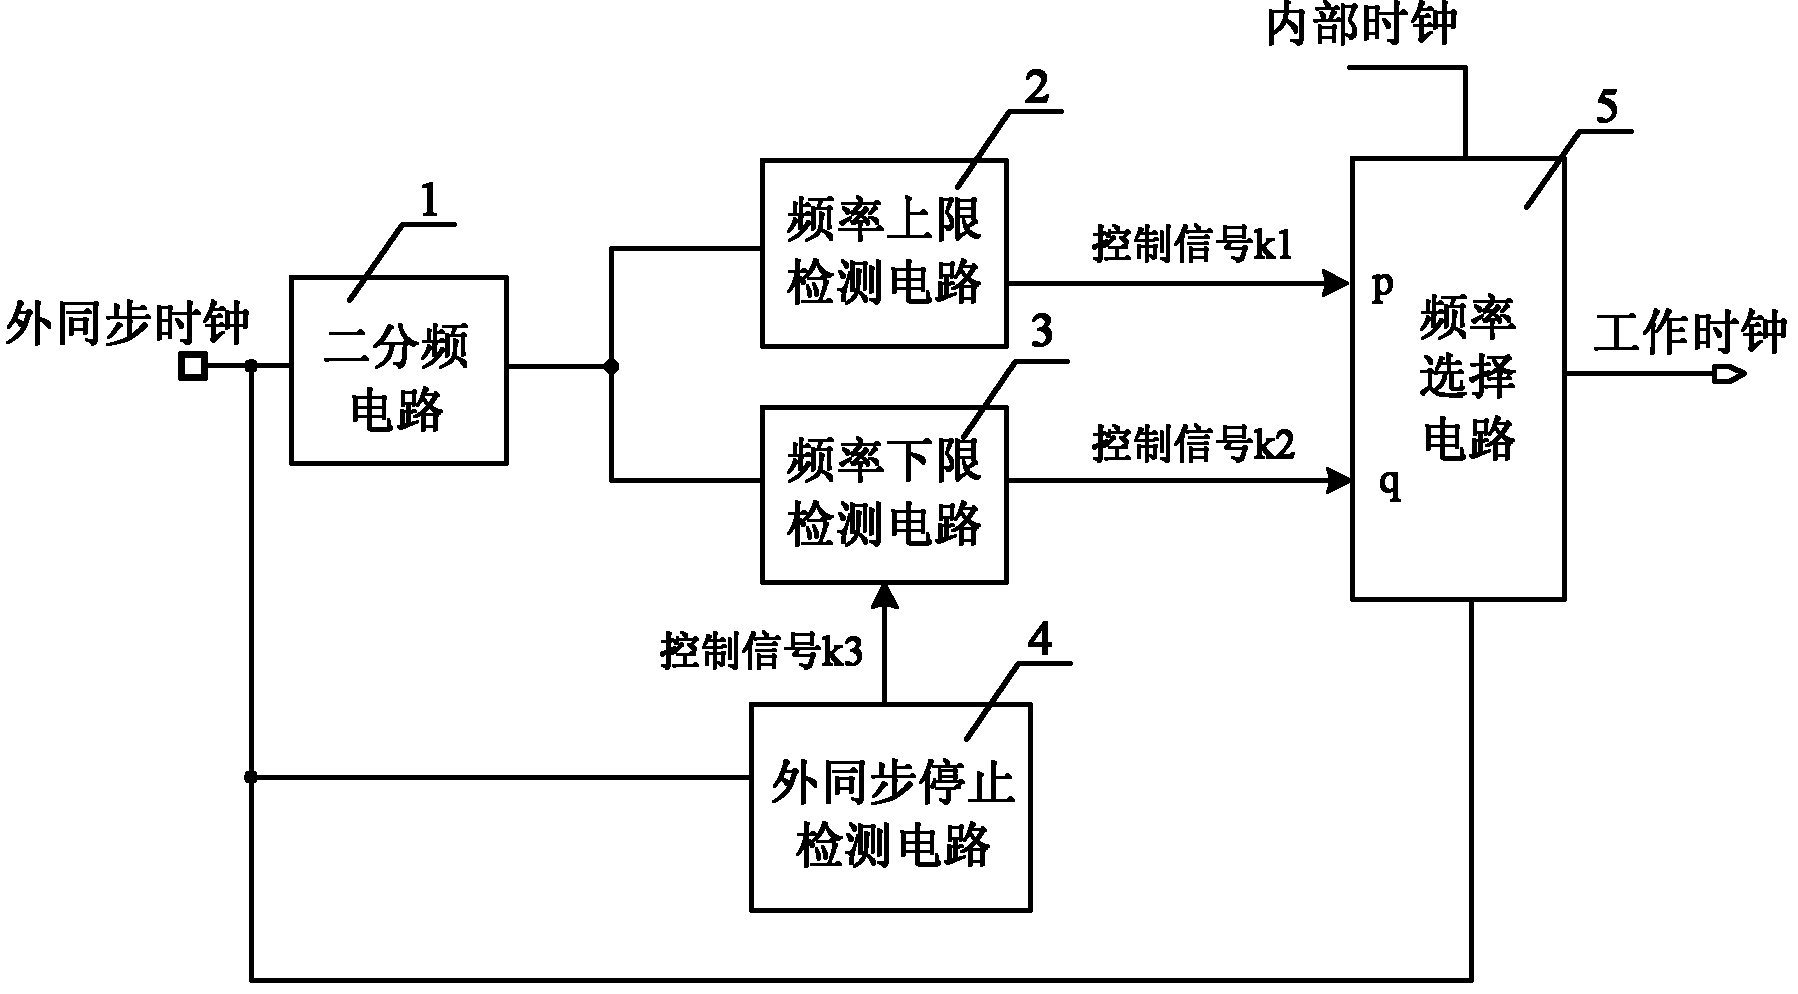 External clock synchronization circuit of switching power supply